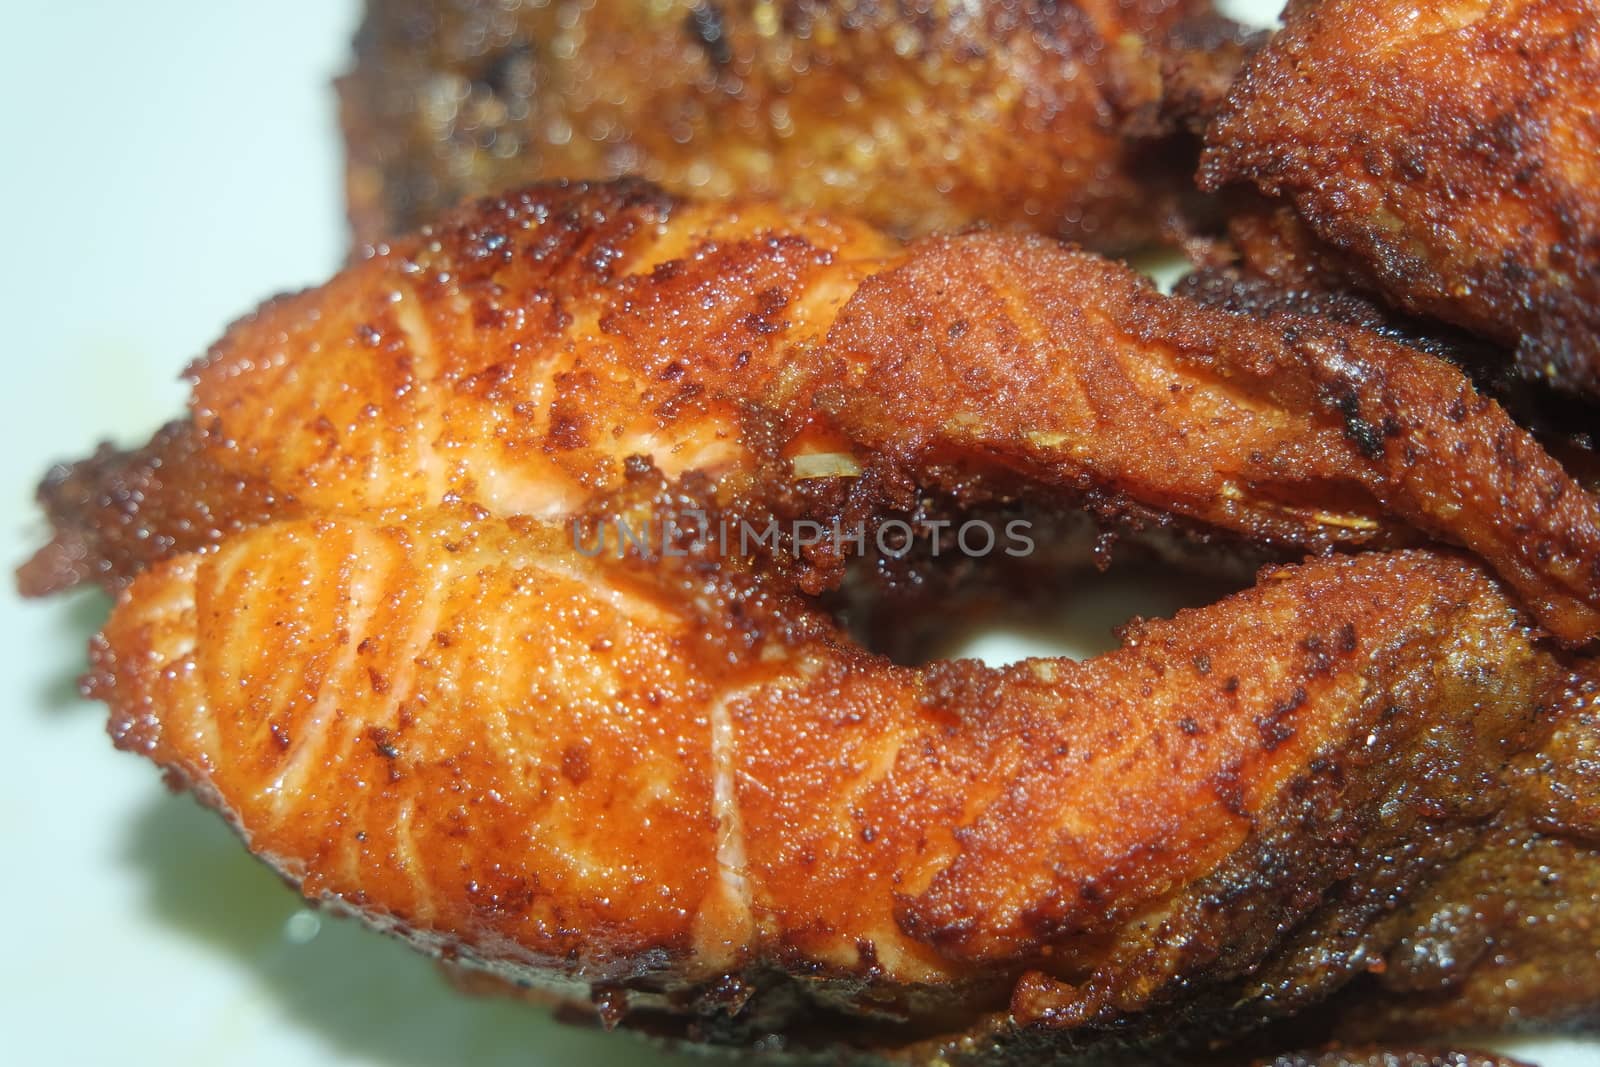 Spicy and crunchy barbecue of fried fish fillet on a white background by Photochowk